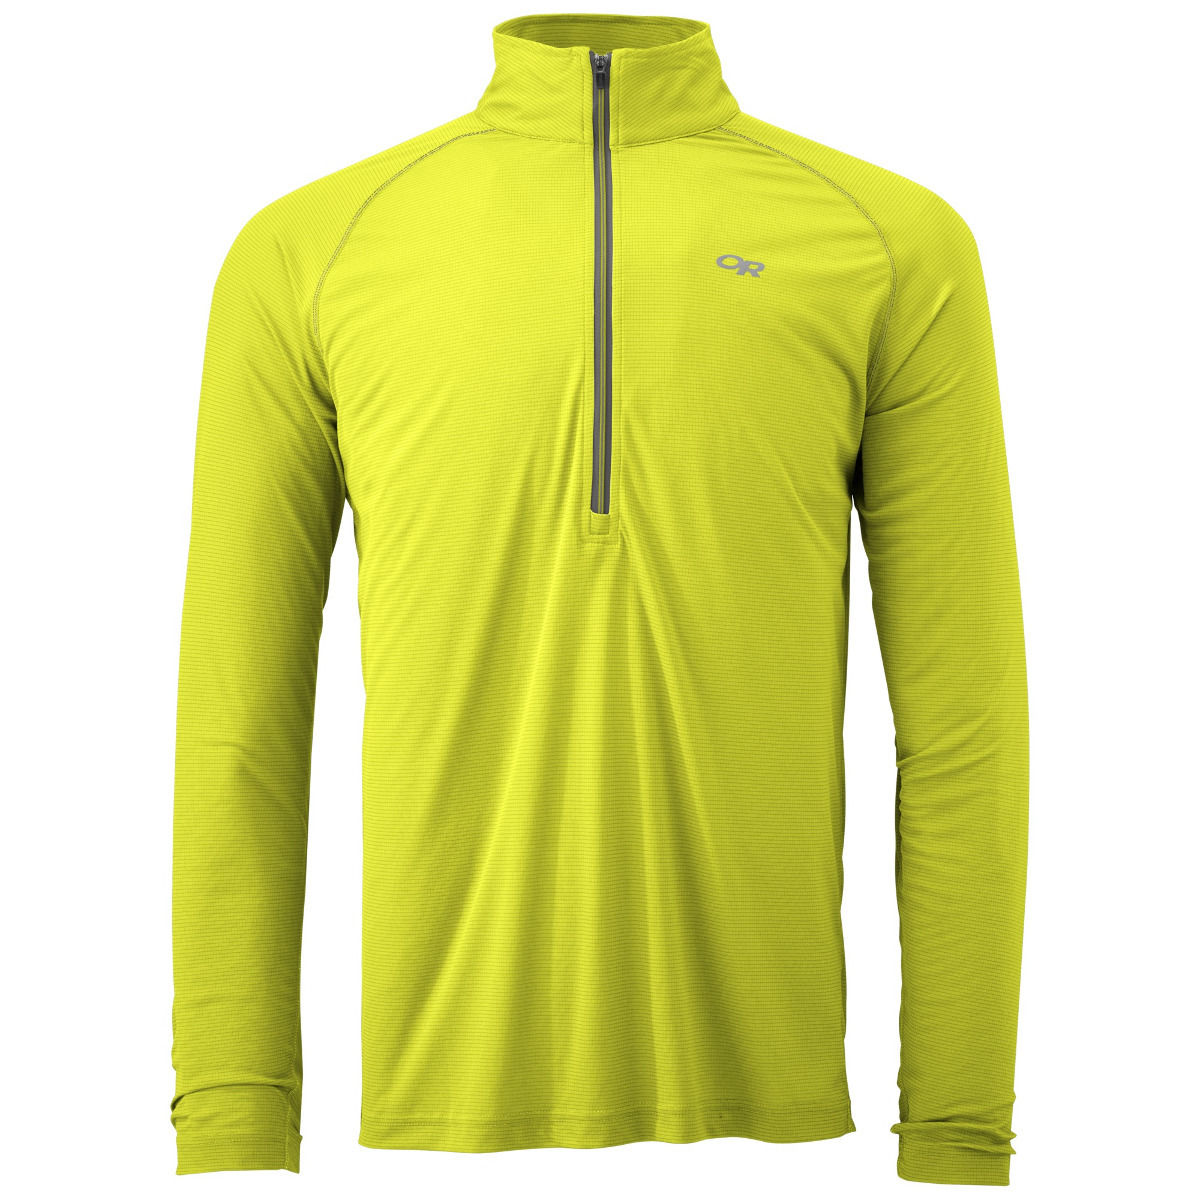 Outdoor Research Echo L/S Zip Tee Reviews - Trailspace